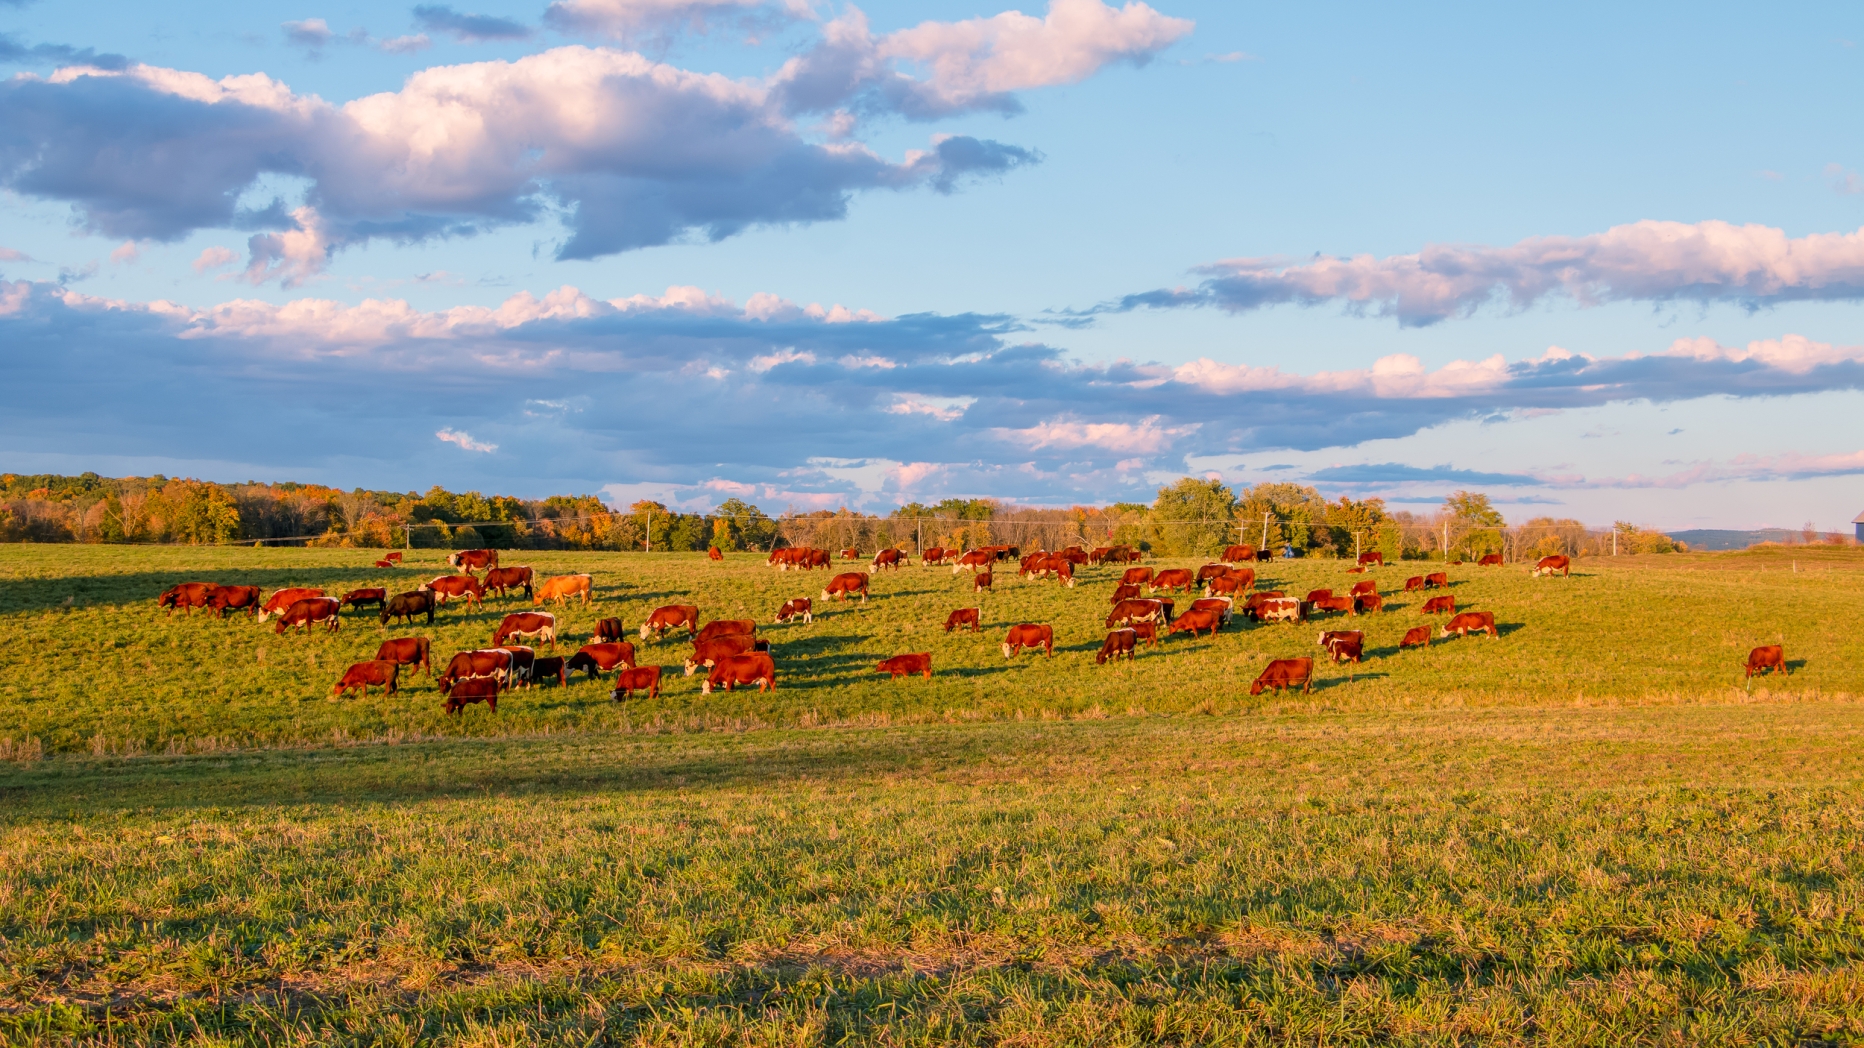 Landscape of cows grazing in pasture with blue skies and puffy clouds